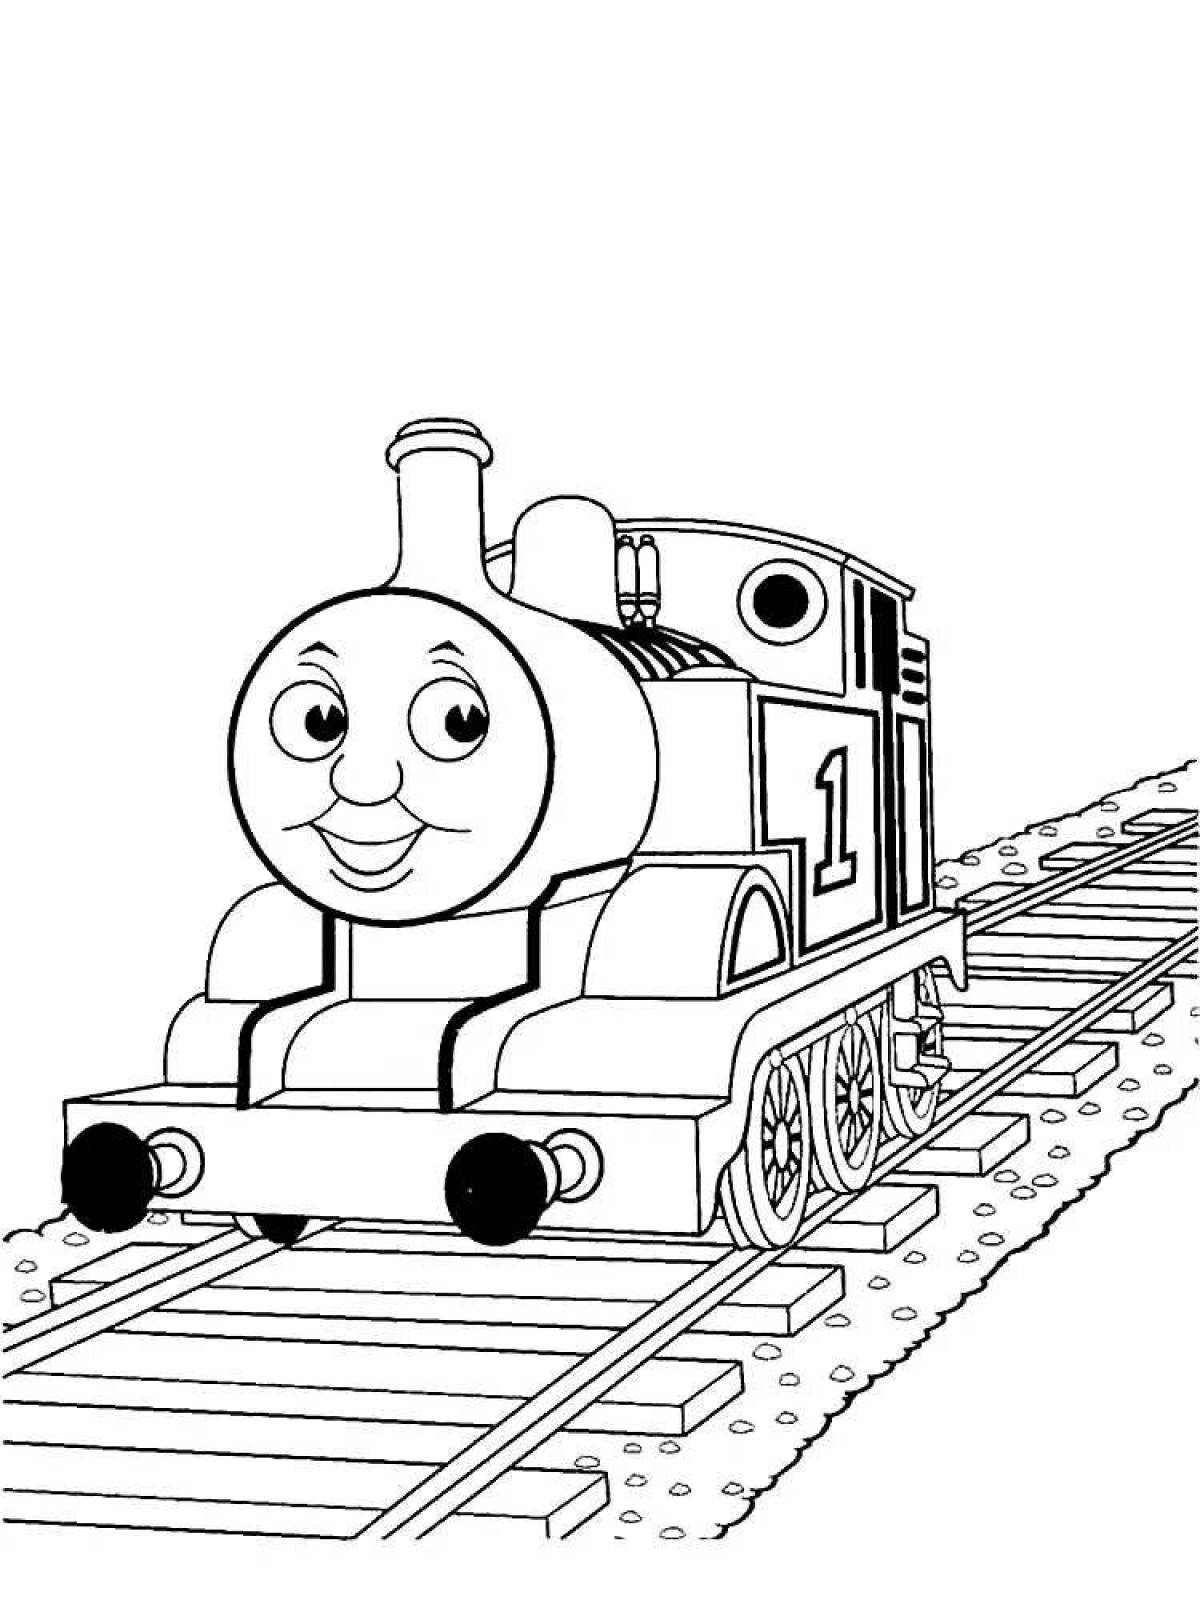 Thomas the Tank Engine coloring book for kids